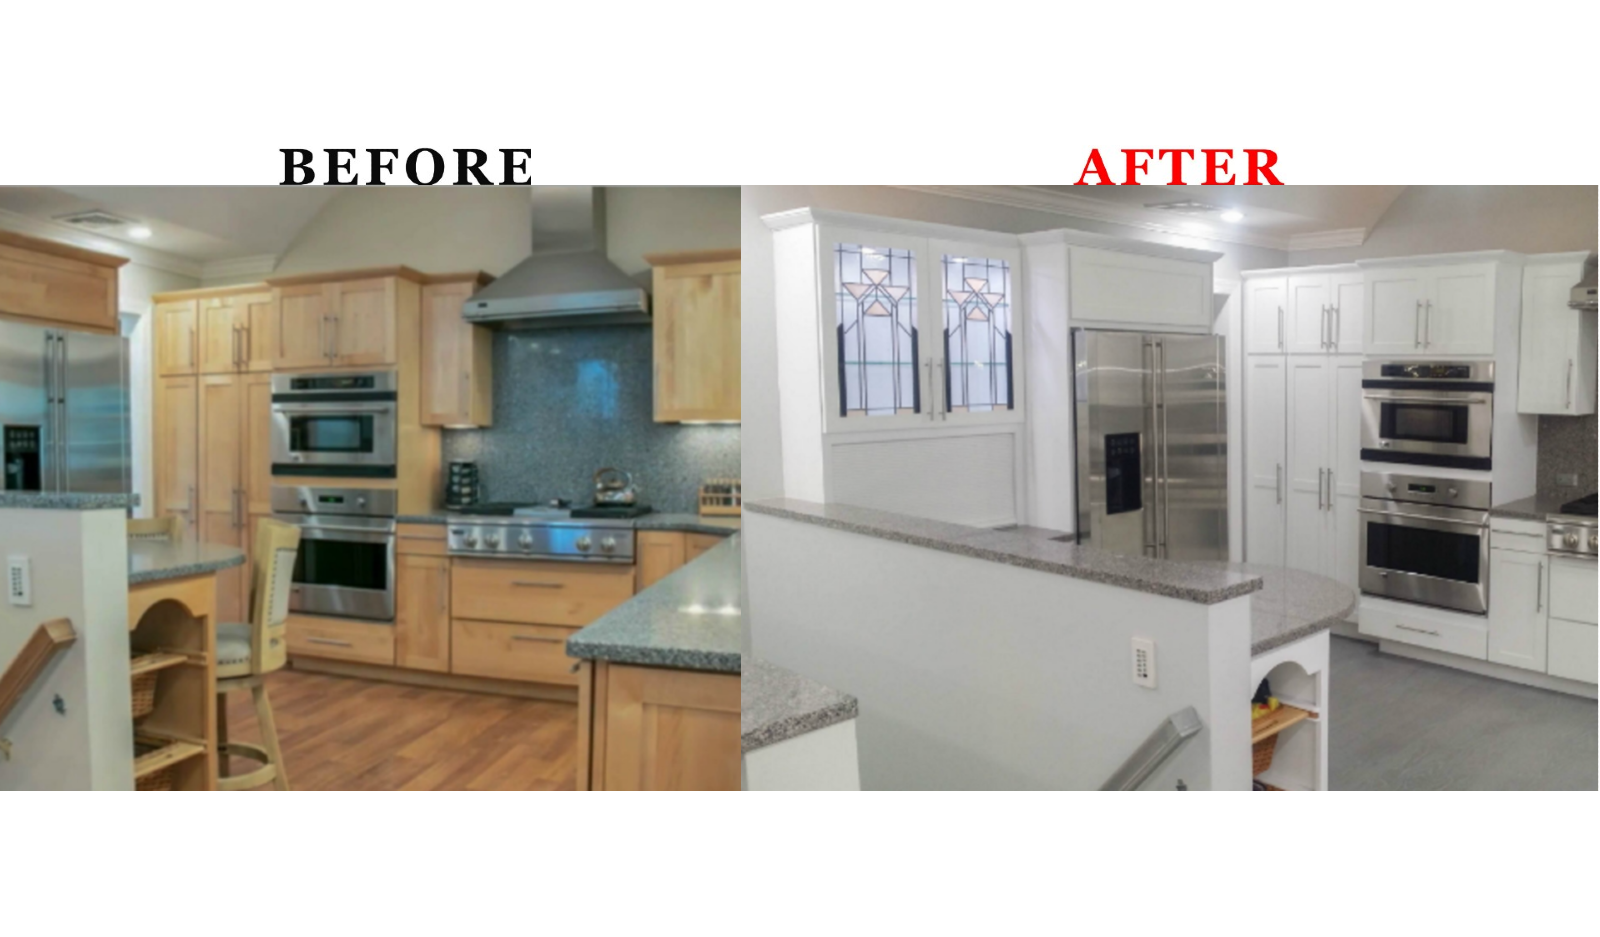 light greypainted kitchen cabinet before and after